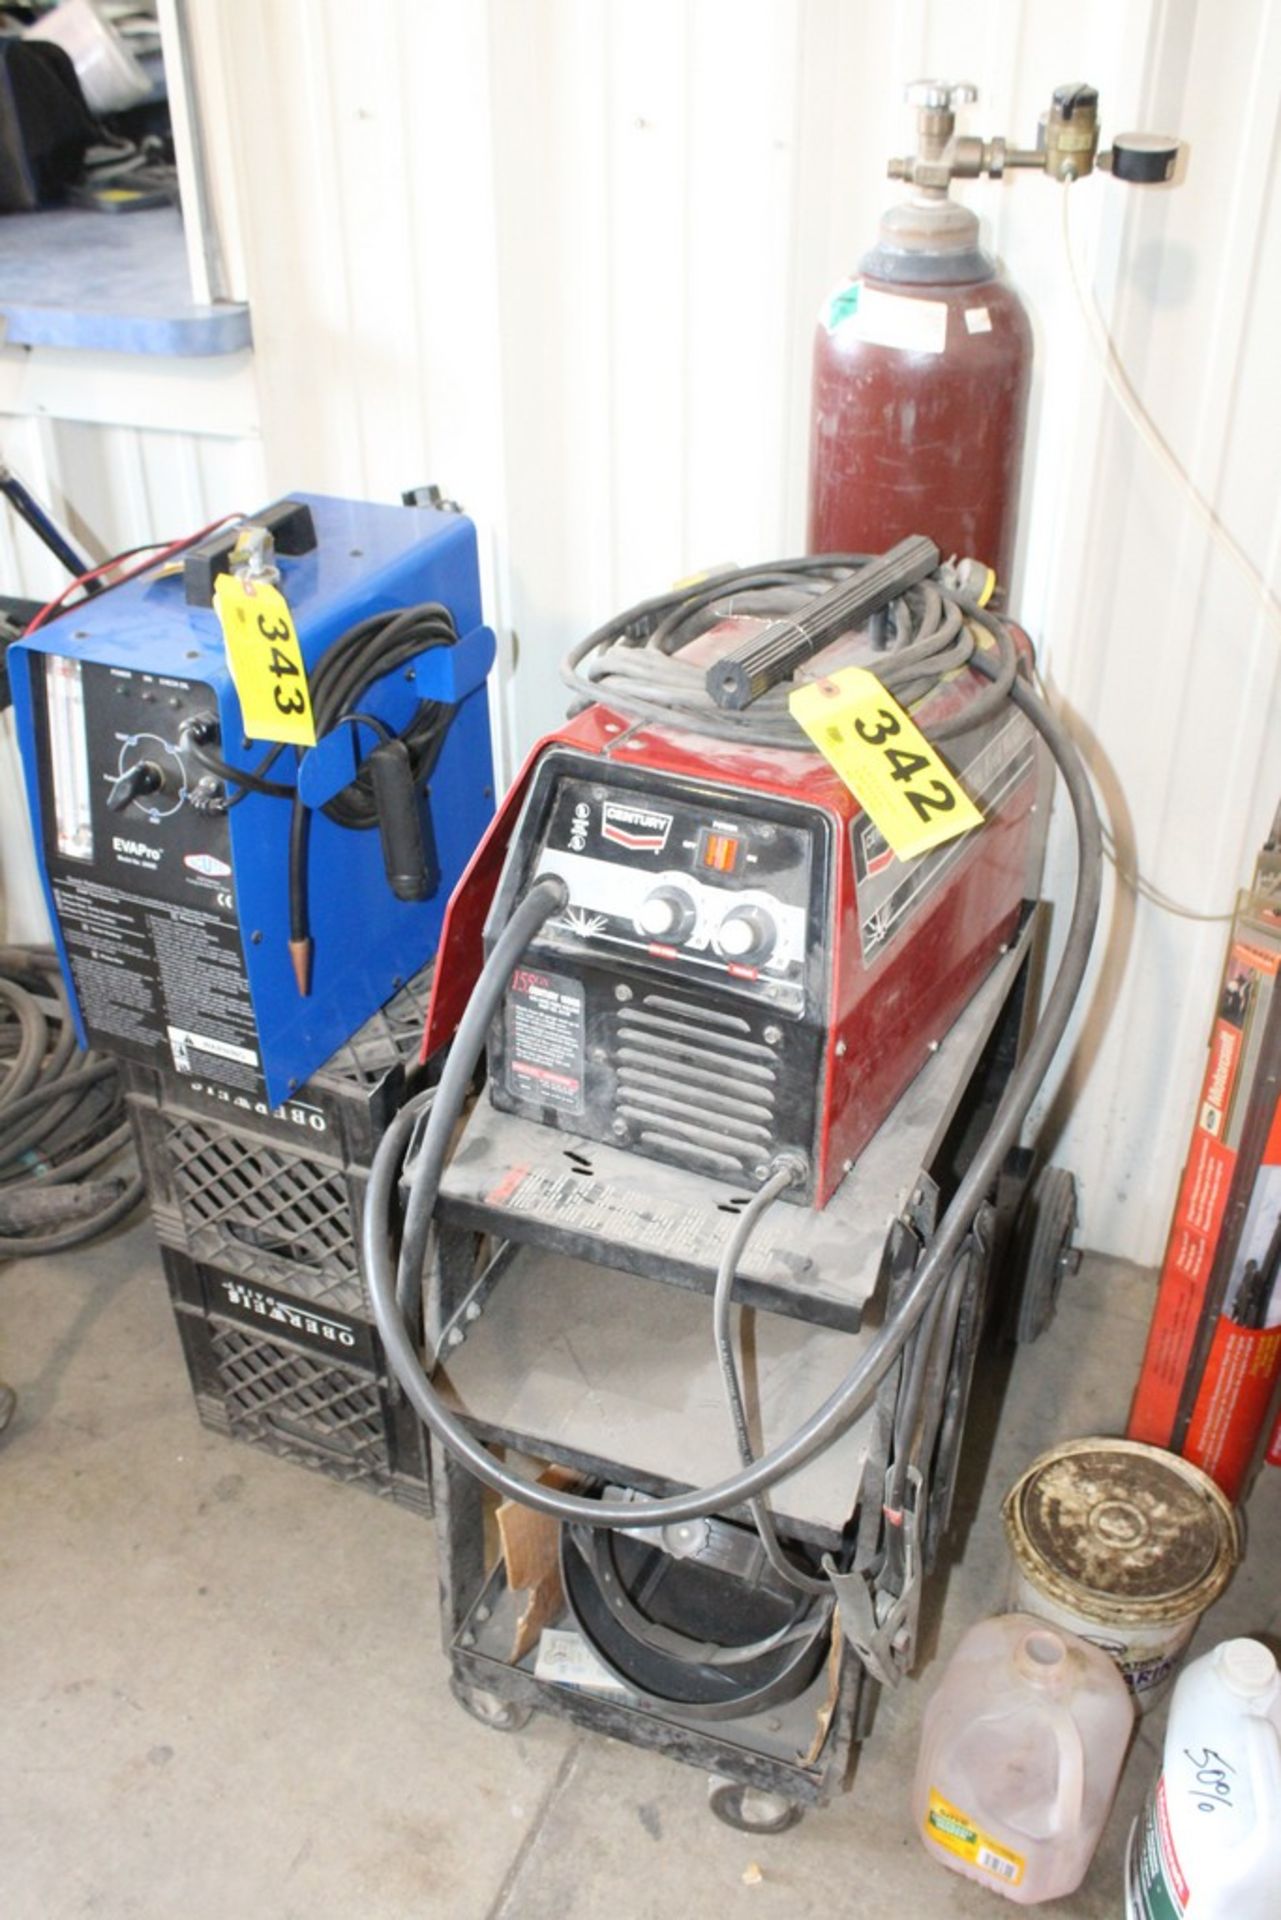 CENTURY MODEL 155GS PROFESSIONAL WIRE FEED WELDER WITH TAANK AND CART